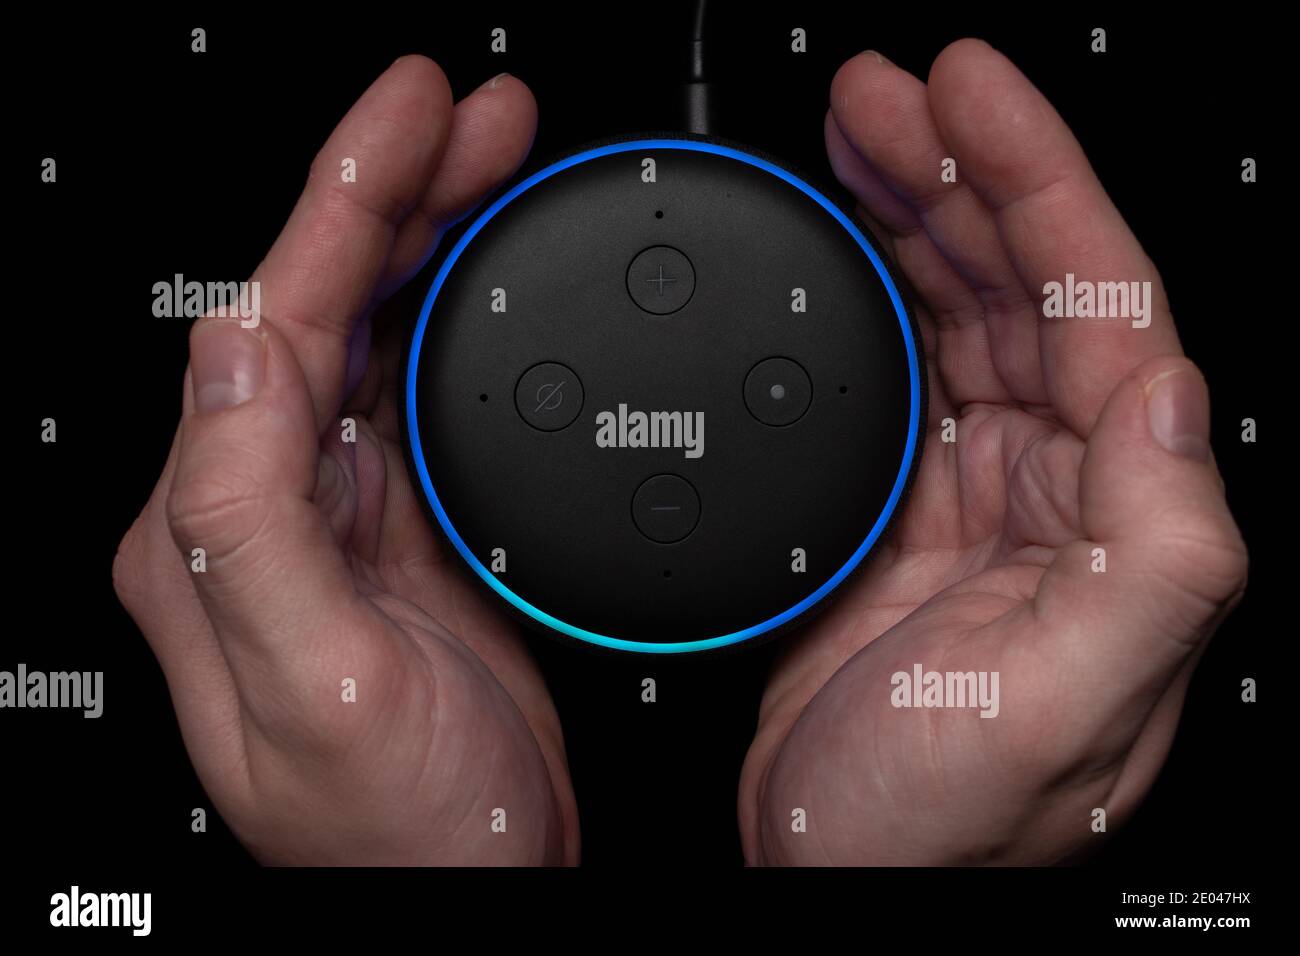 London, United Kingdom - December 19 2020: Hands around an Amazon Echo Dot smart speaker with built-in Alexa voice assistant. Stock Photo